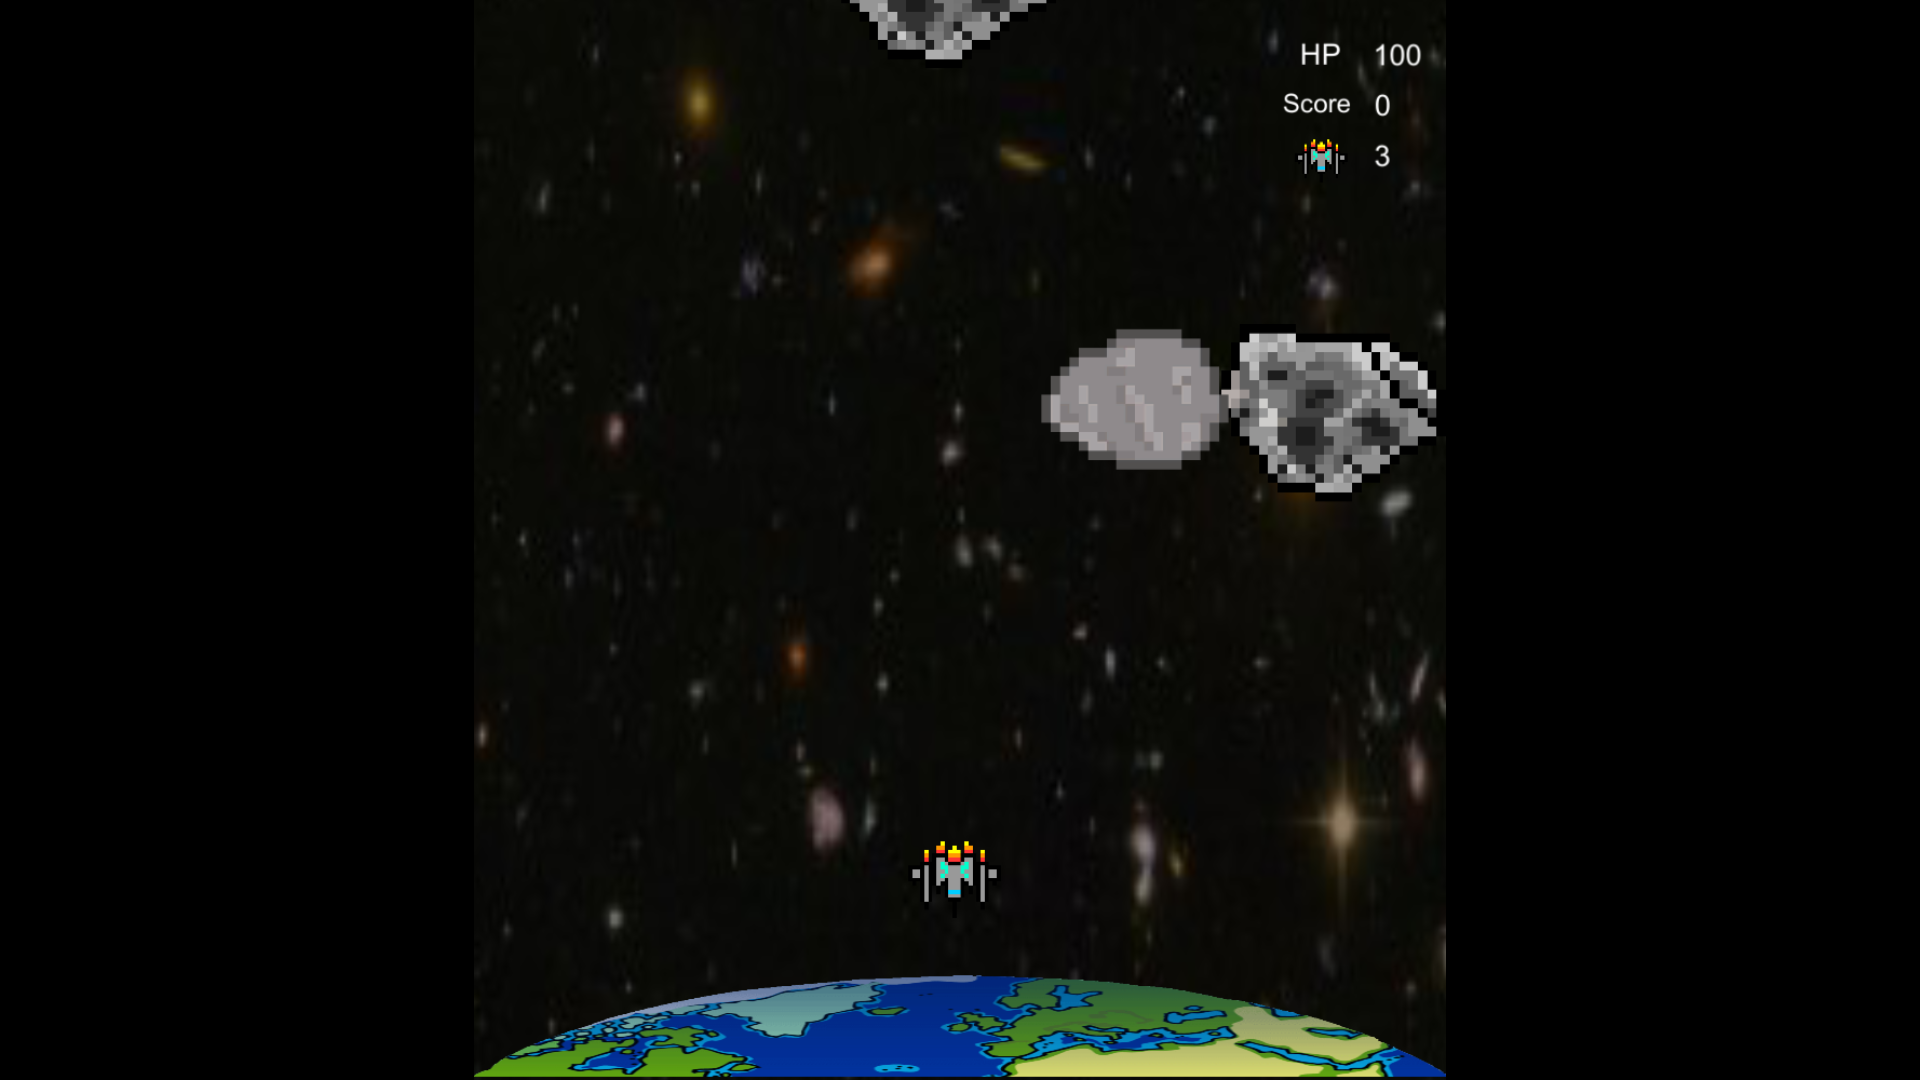 Space shooter game